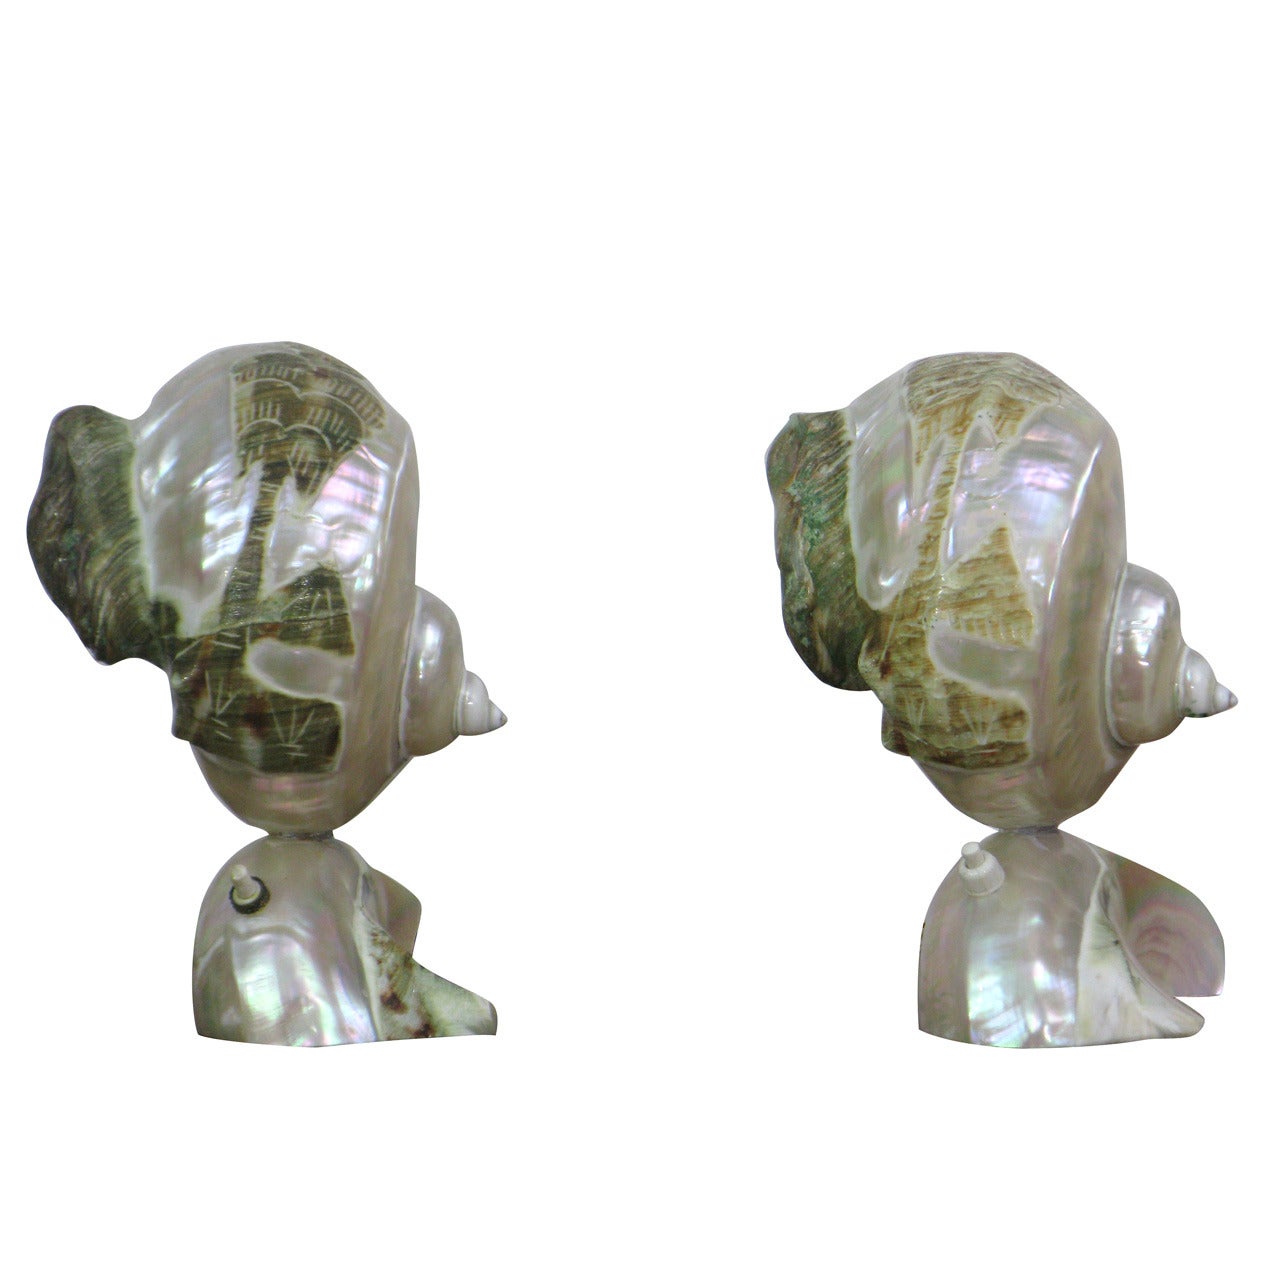 Rare Pair of Natural Decorated "Iridescent Turban" Shell Lamps, 1930s For Sale